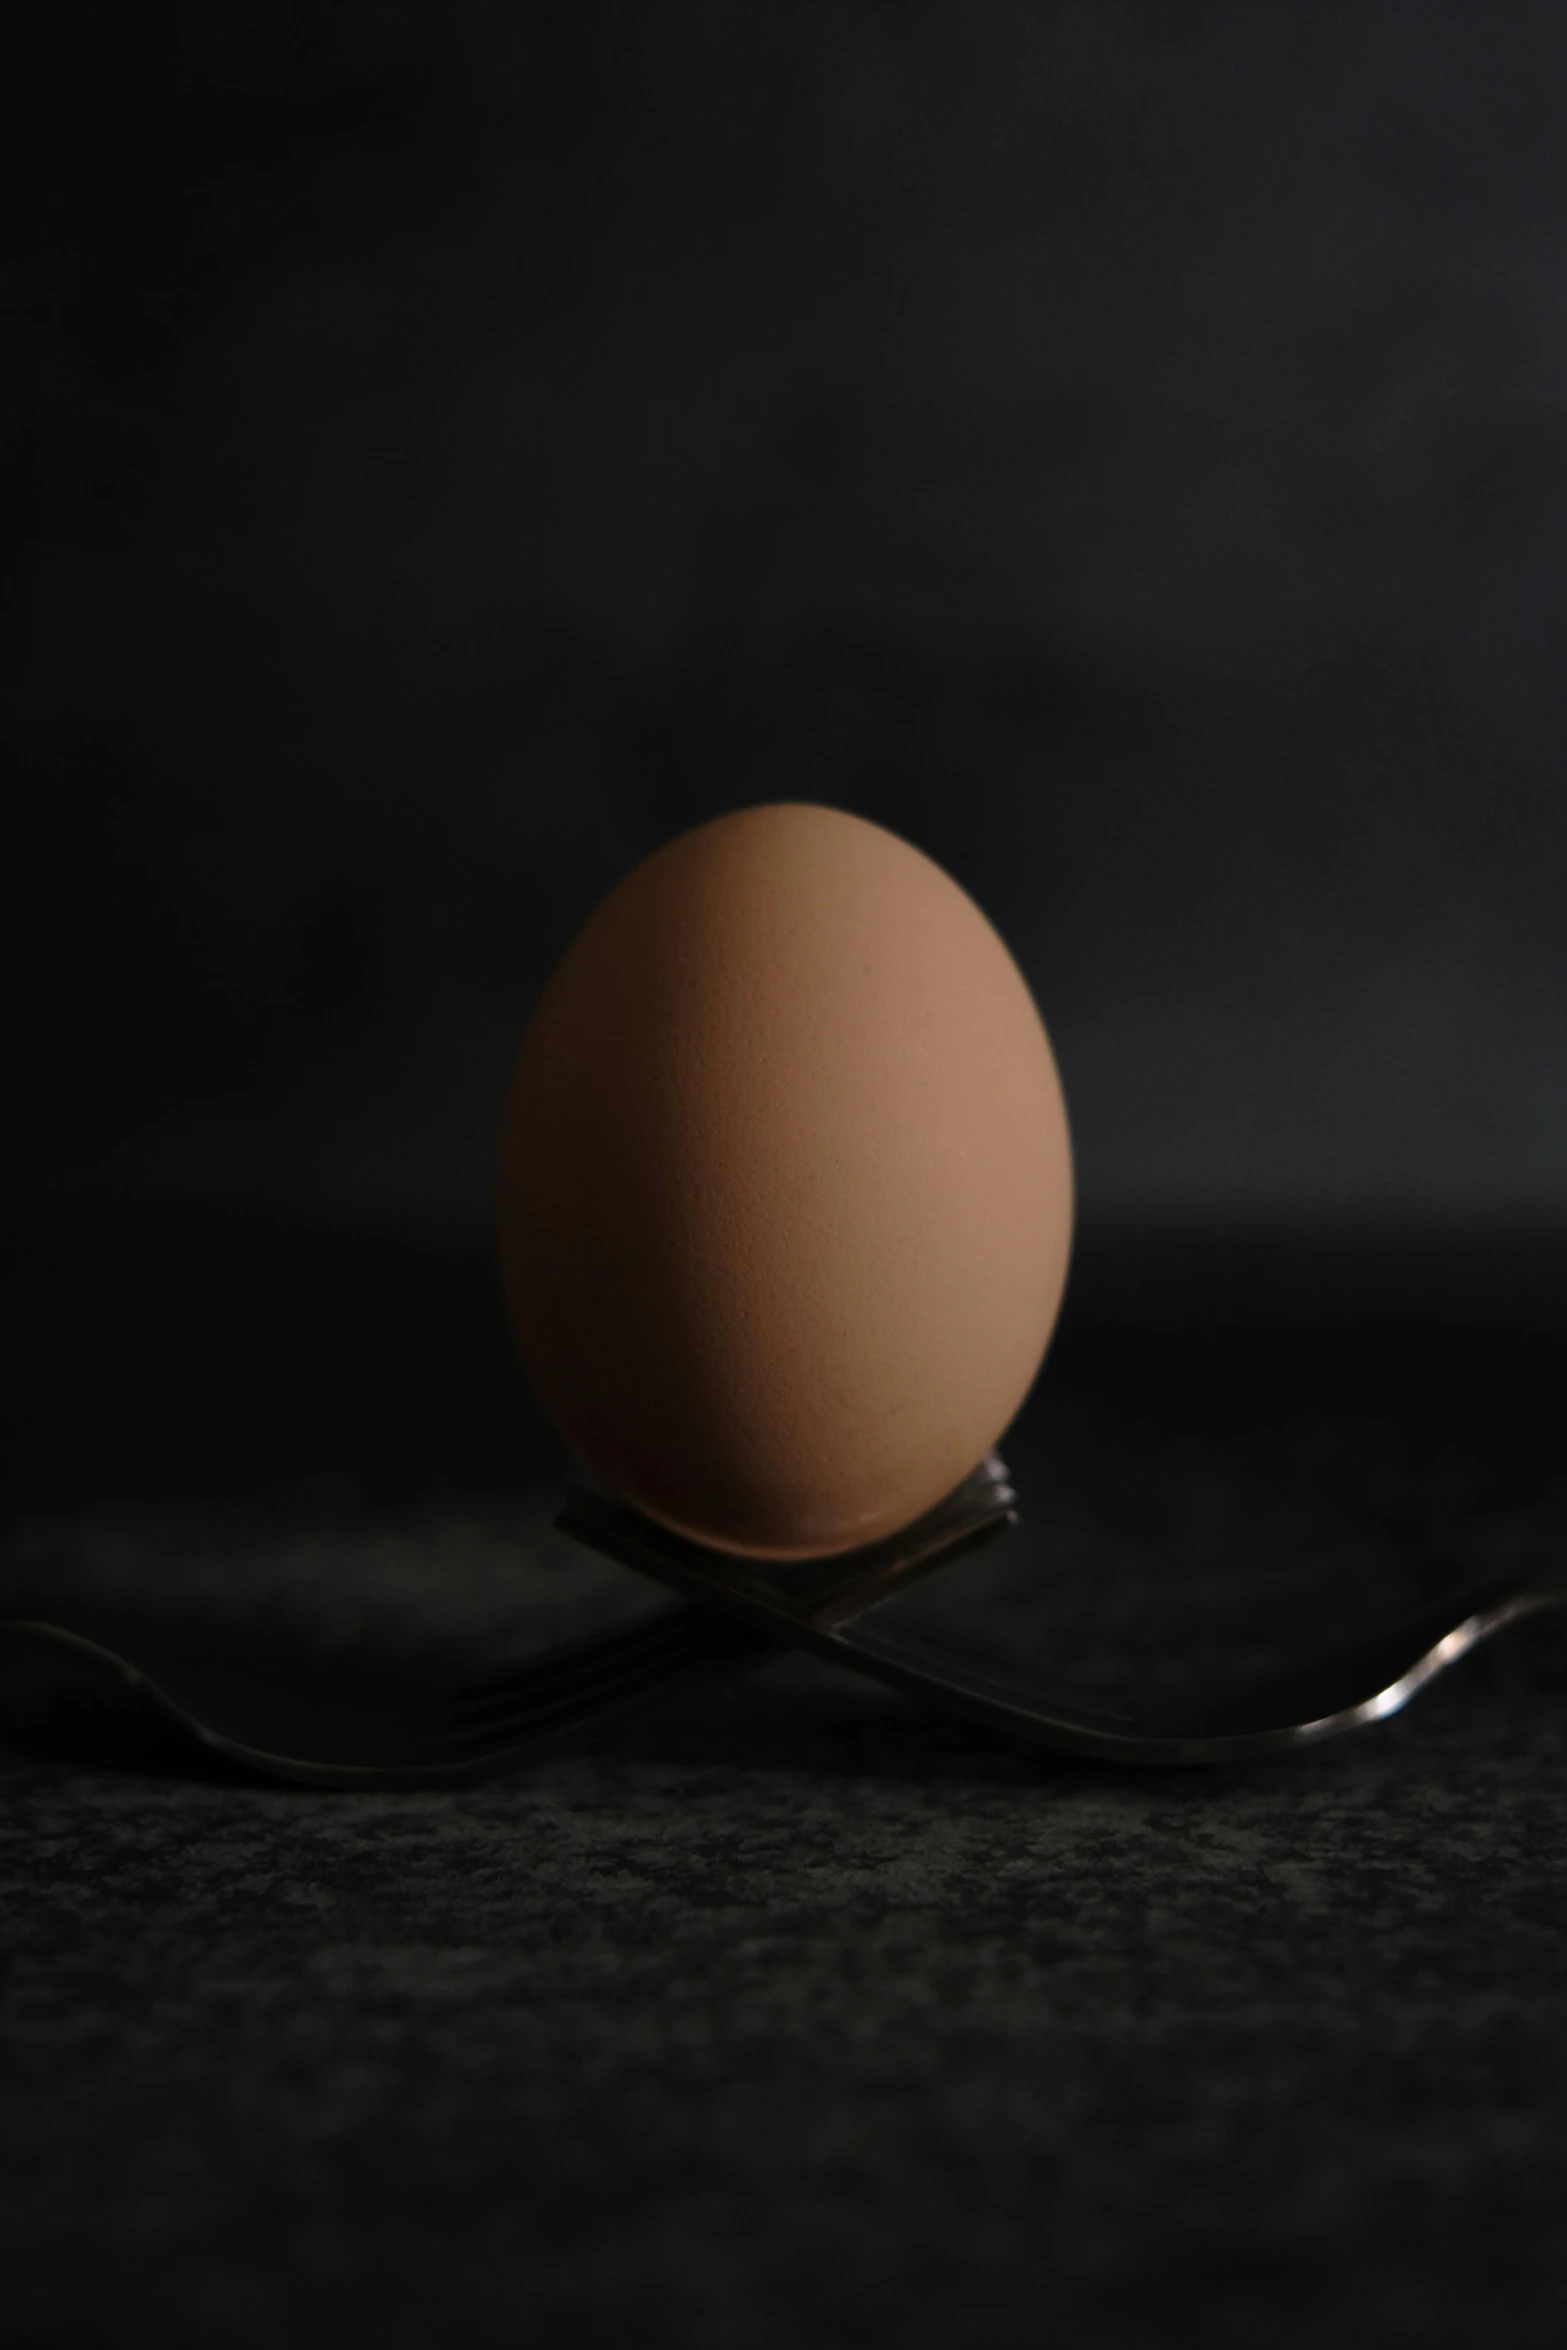 a close up view of a single egg on a fork